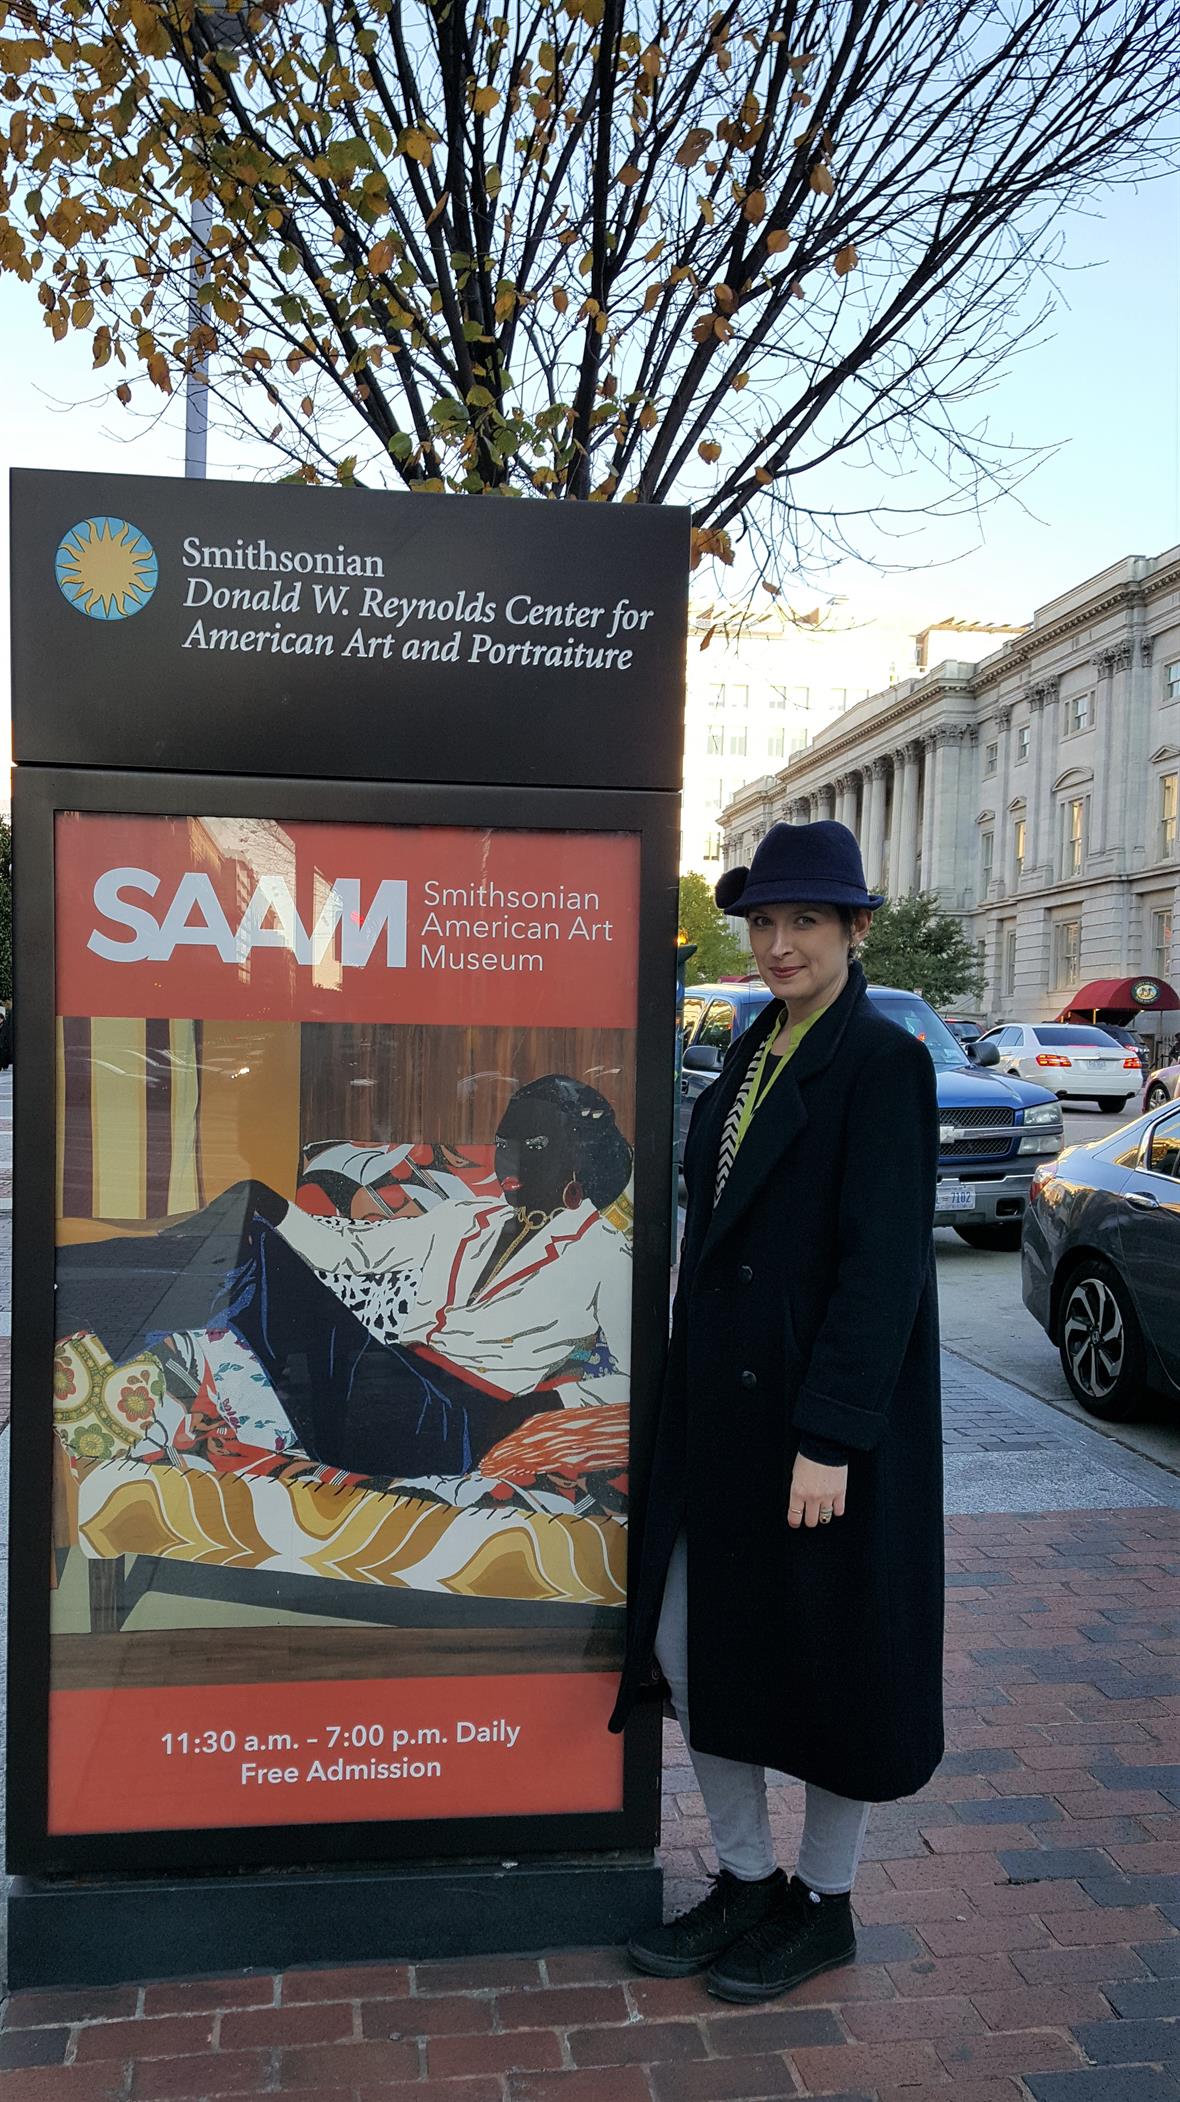 Alba Campo Rosillo stands next to Smithsonian sign in Washington, D.C.